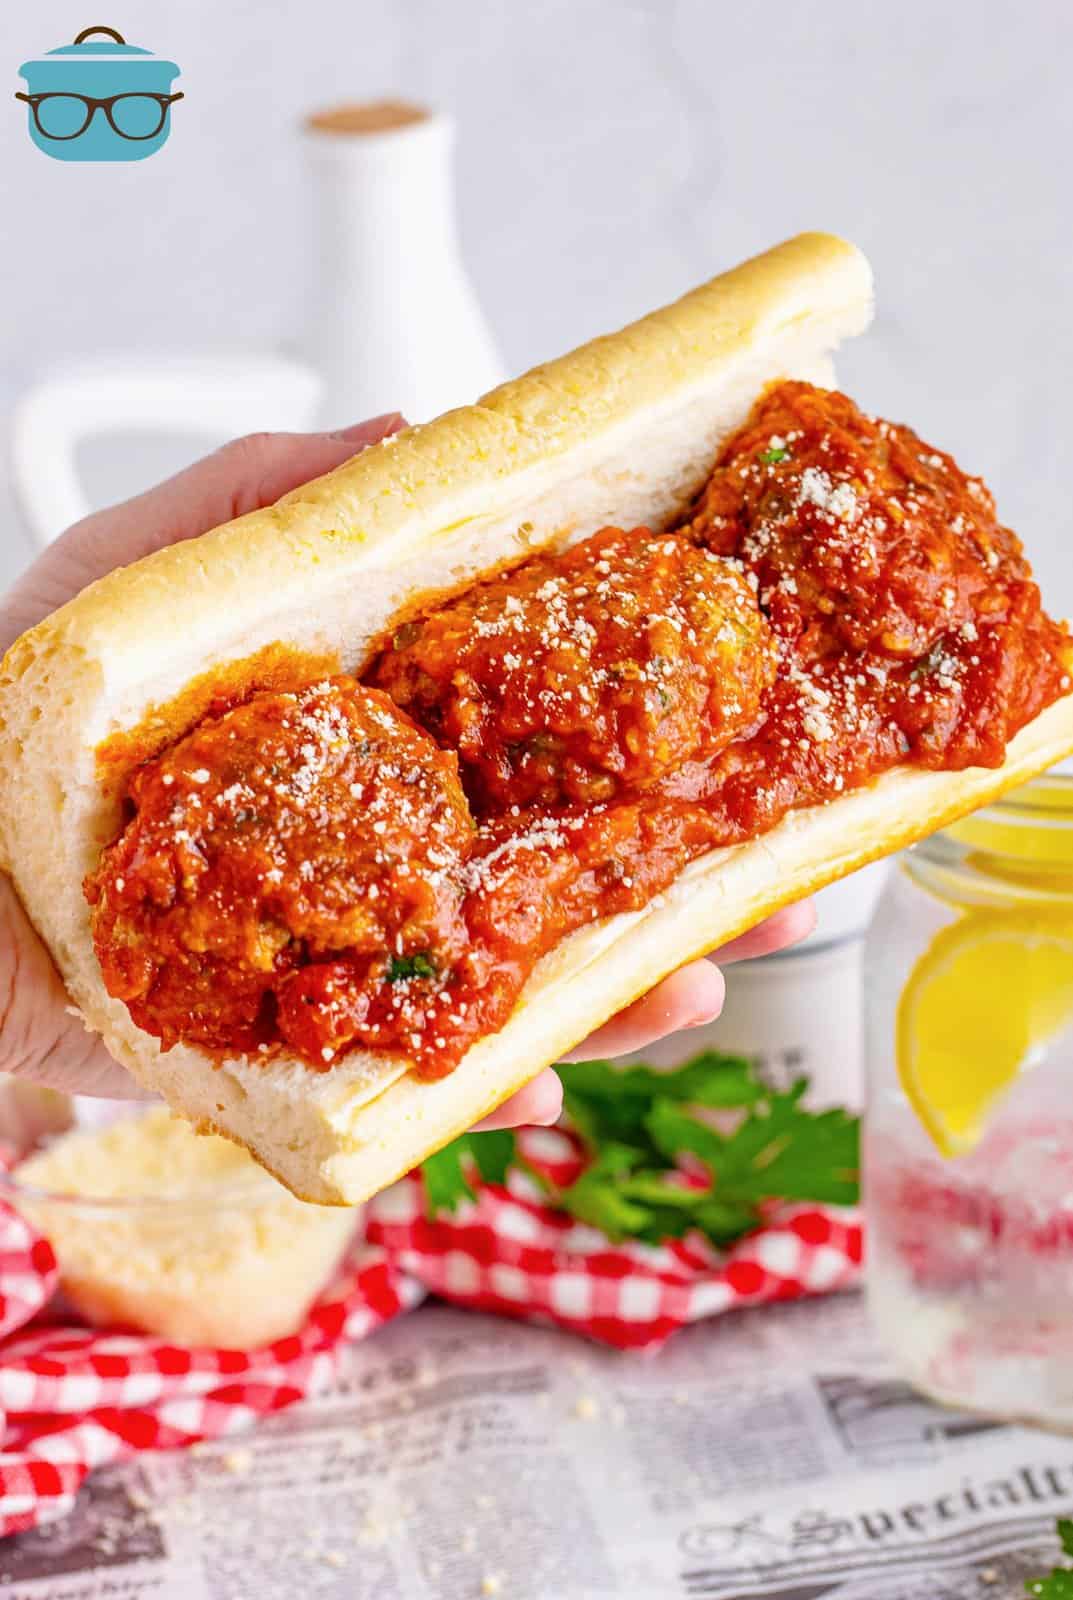 A large sub roll with Homemade Meatballs.